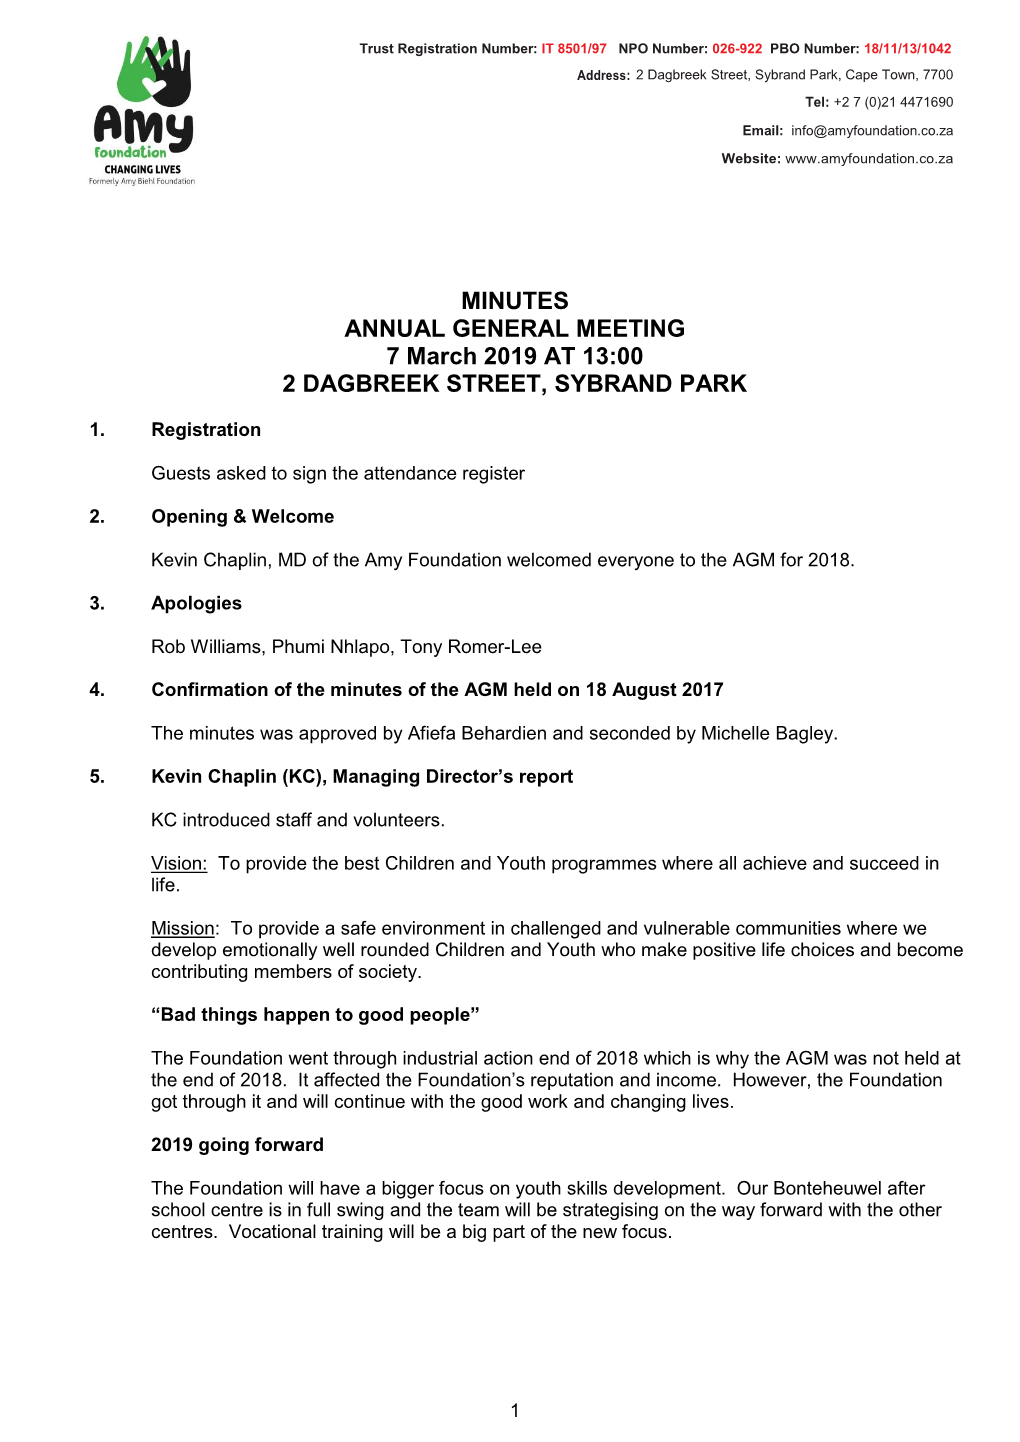 AGM Minutes March 2019